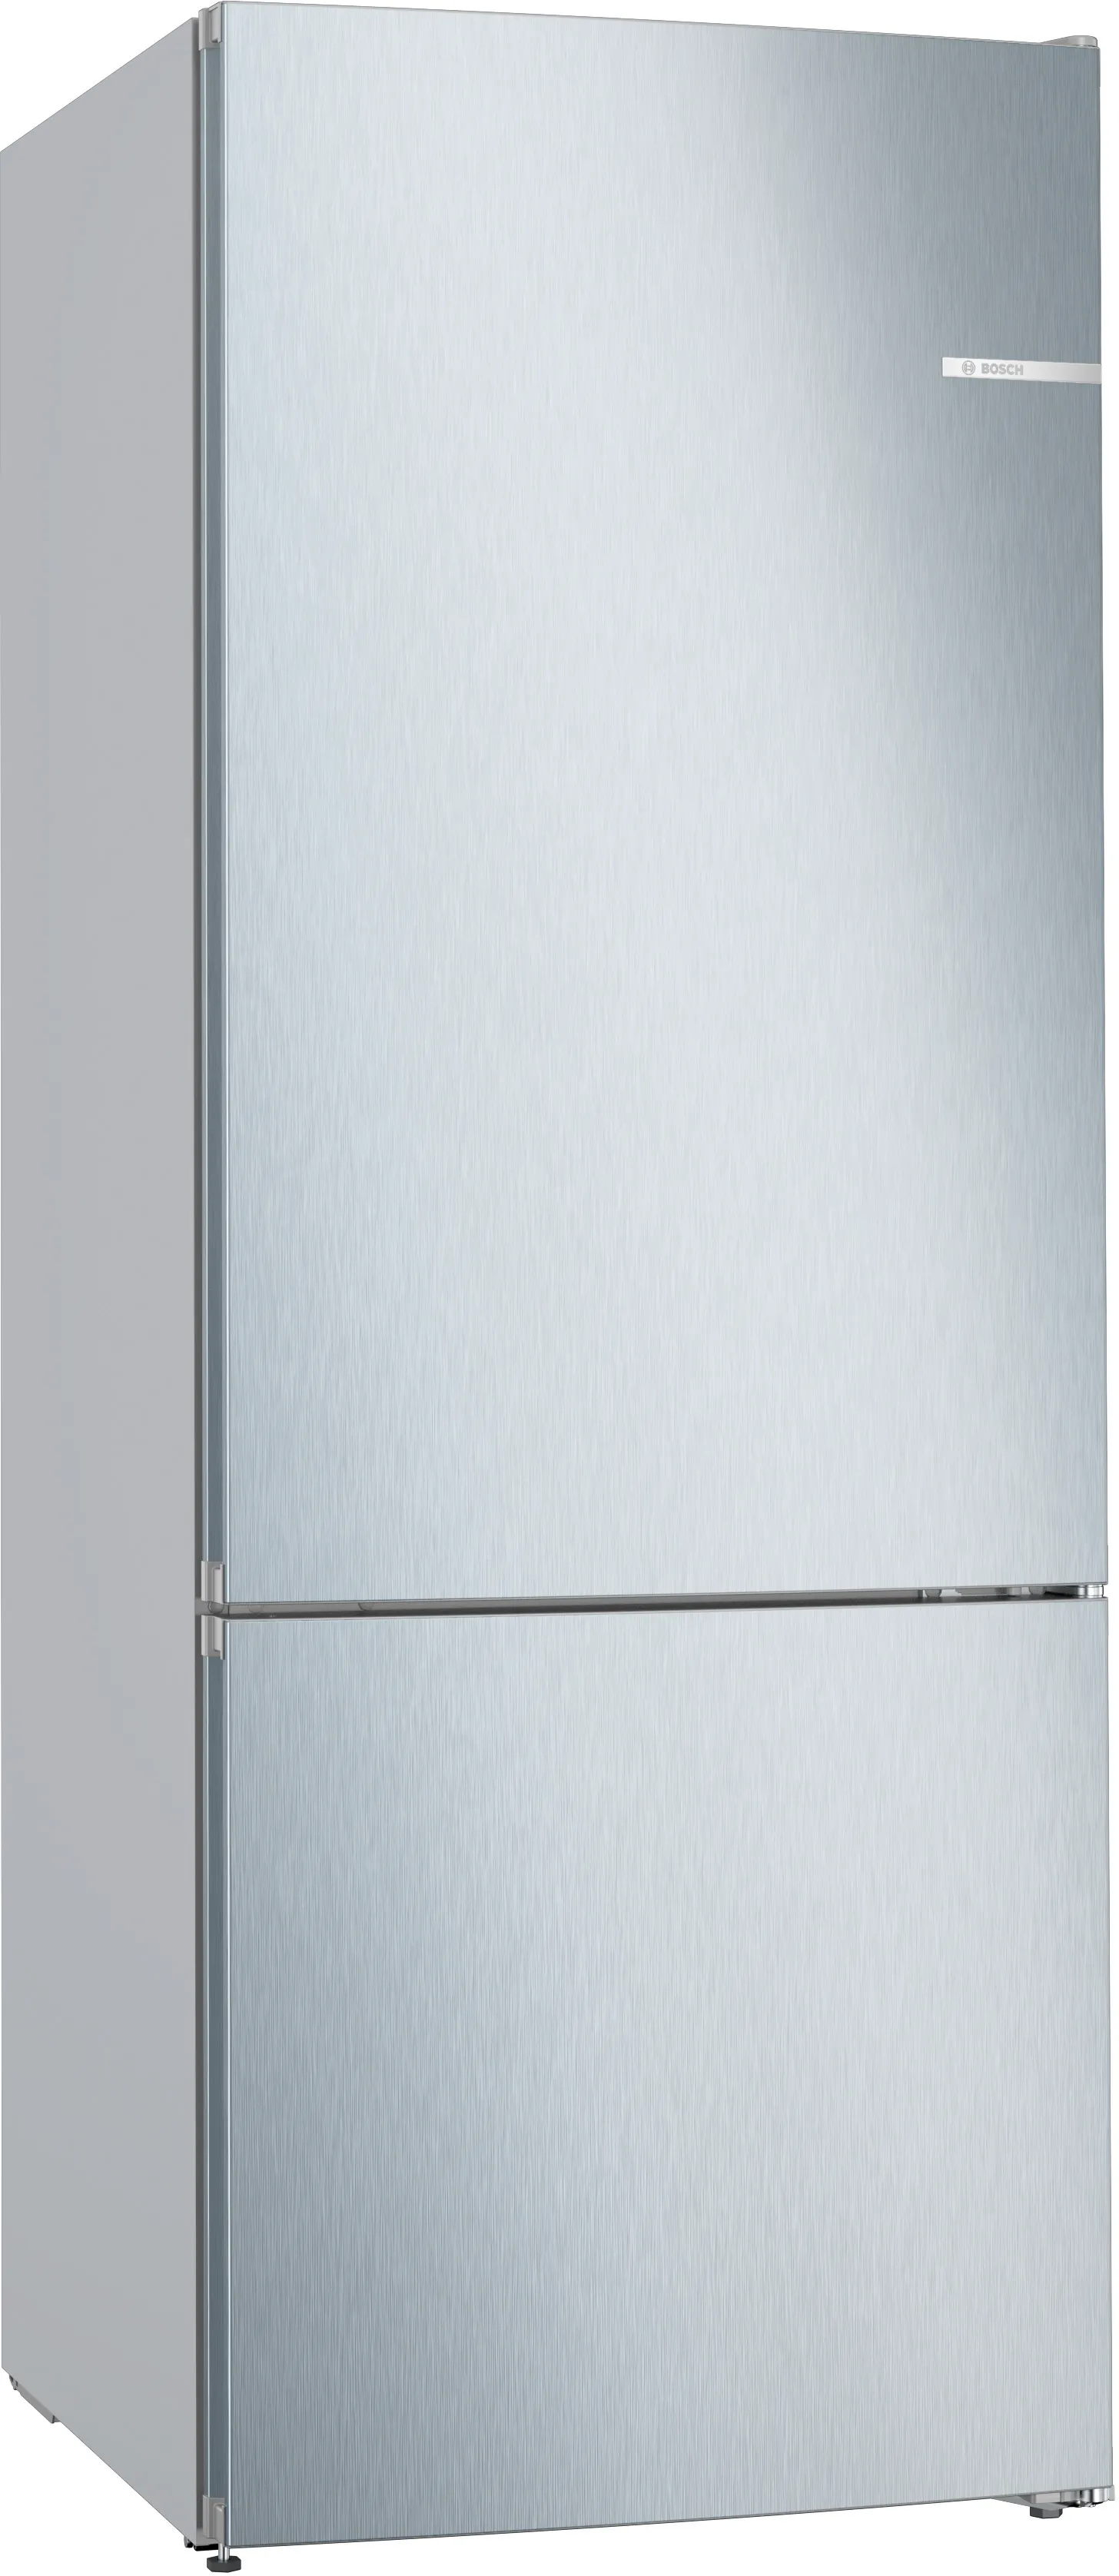 Series 4 free-standing fridge-freezer with freezer at bottom 186 x 70 cm Stainless steel look 